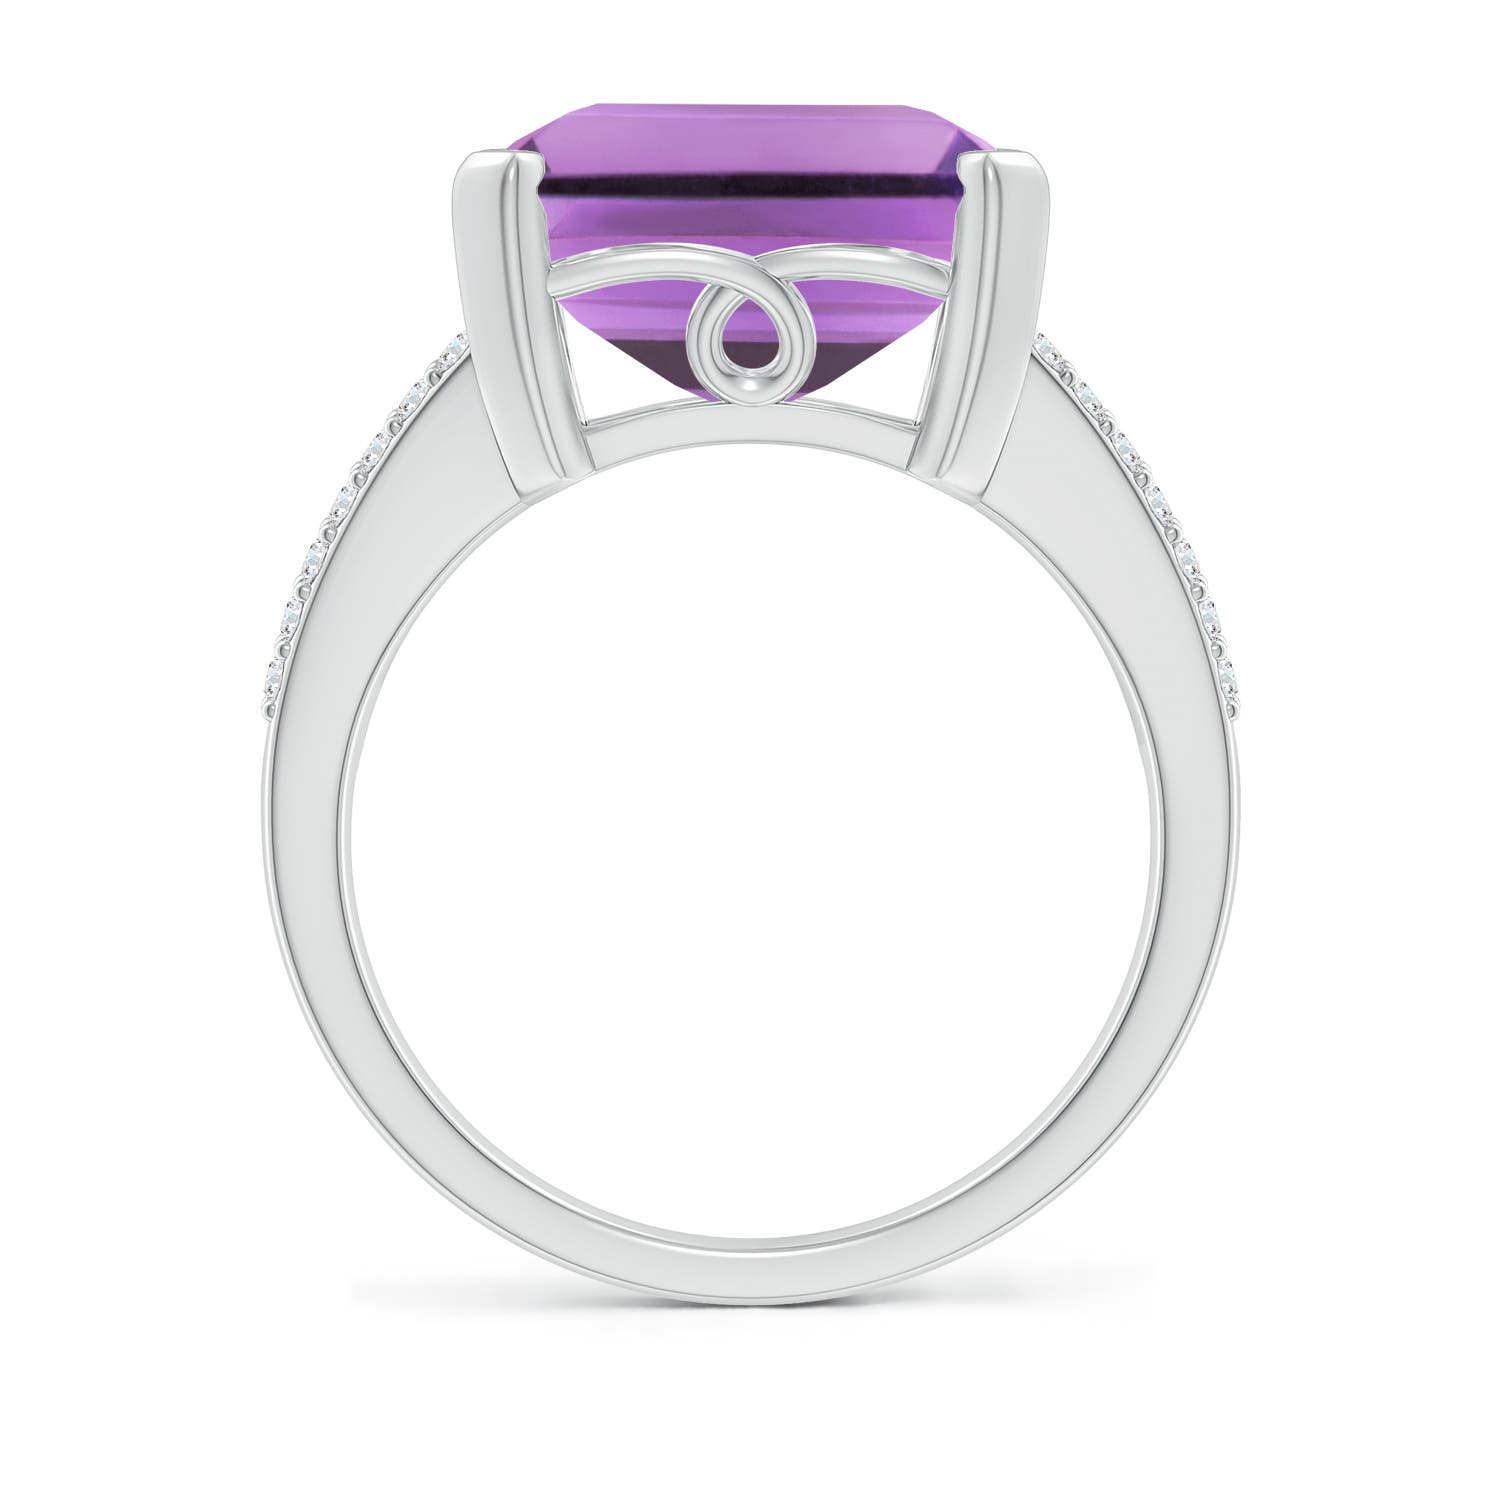 A - Amethyst / 9.82 CT / 14 KT White Gold